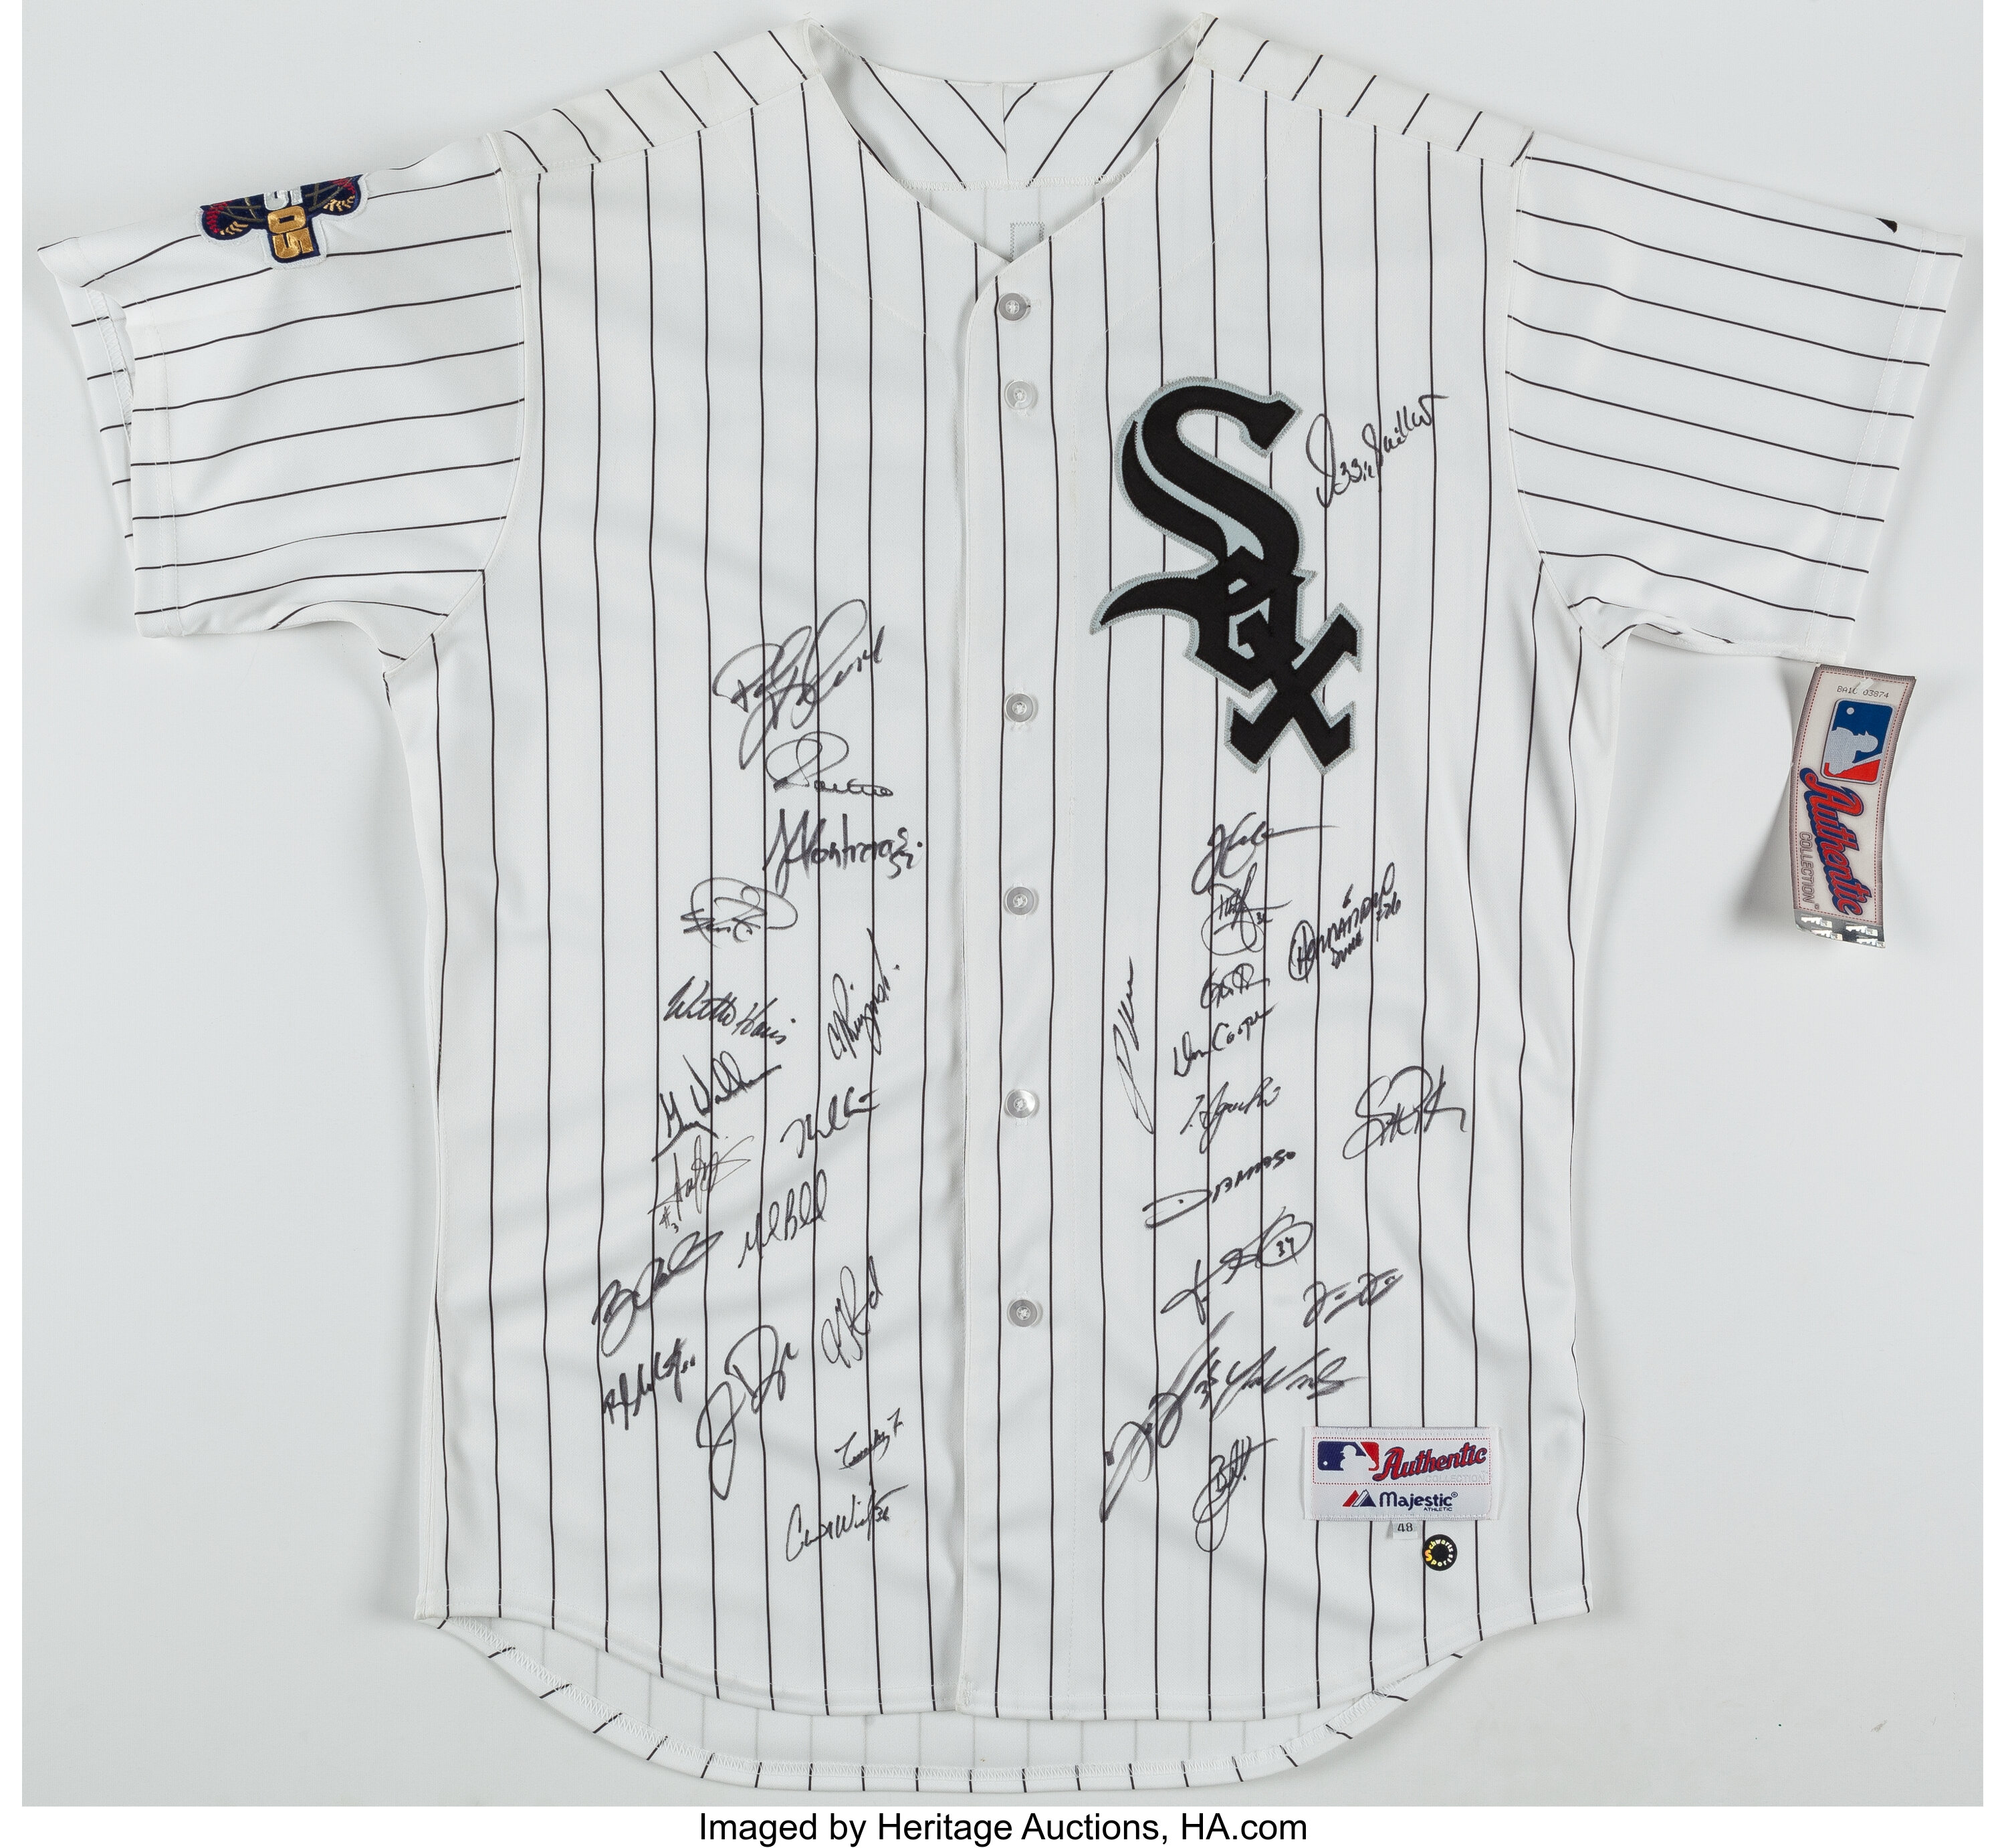 2005 Chicago White Sox - World Series Champs - Team Signed Jersey